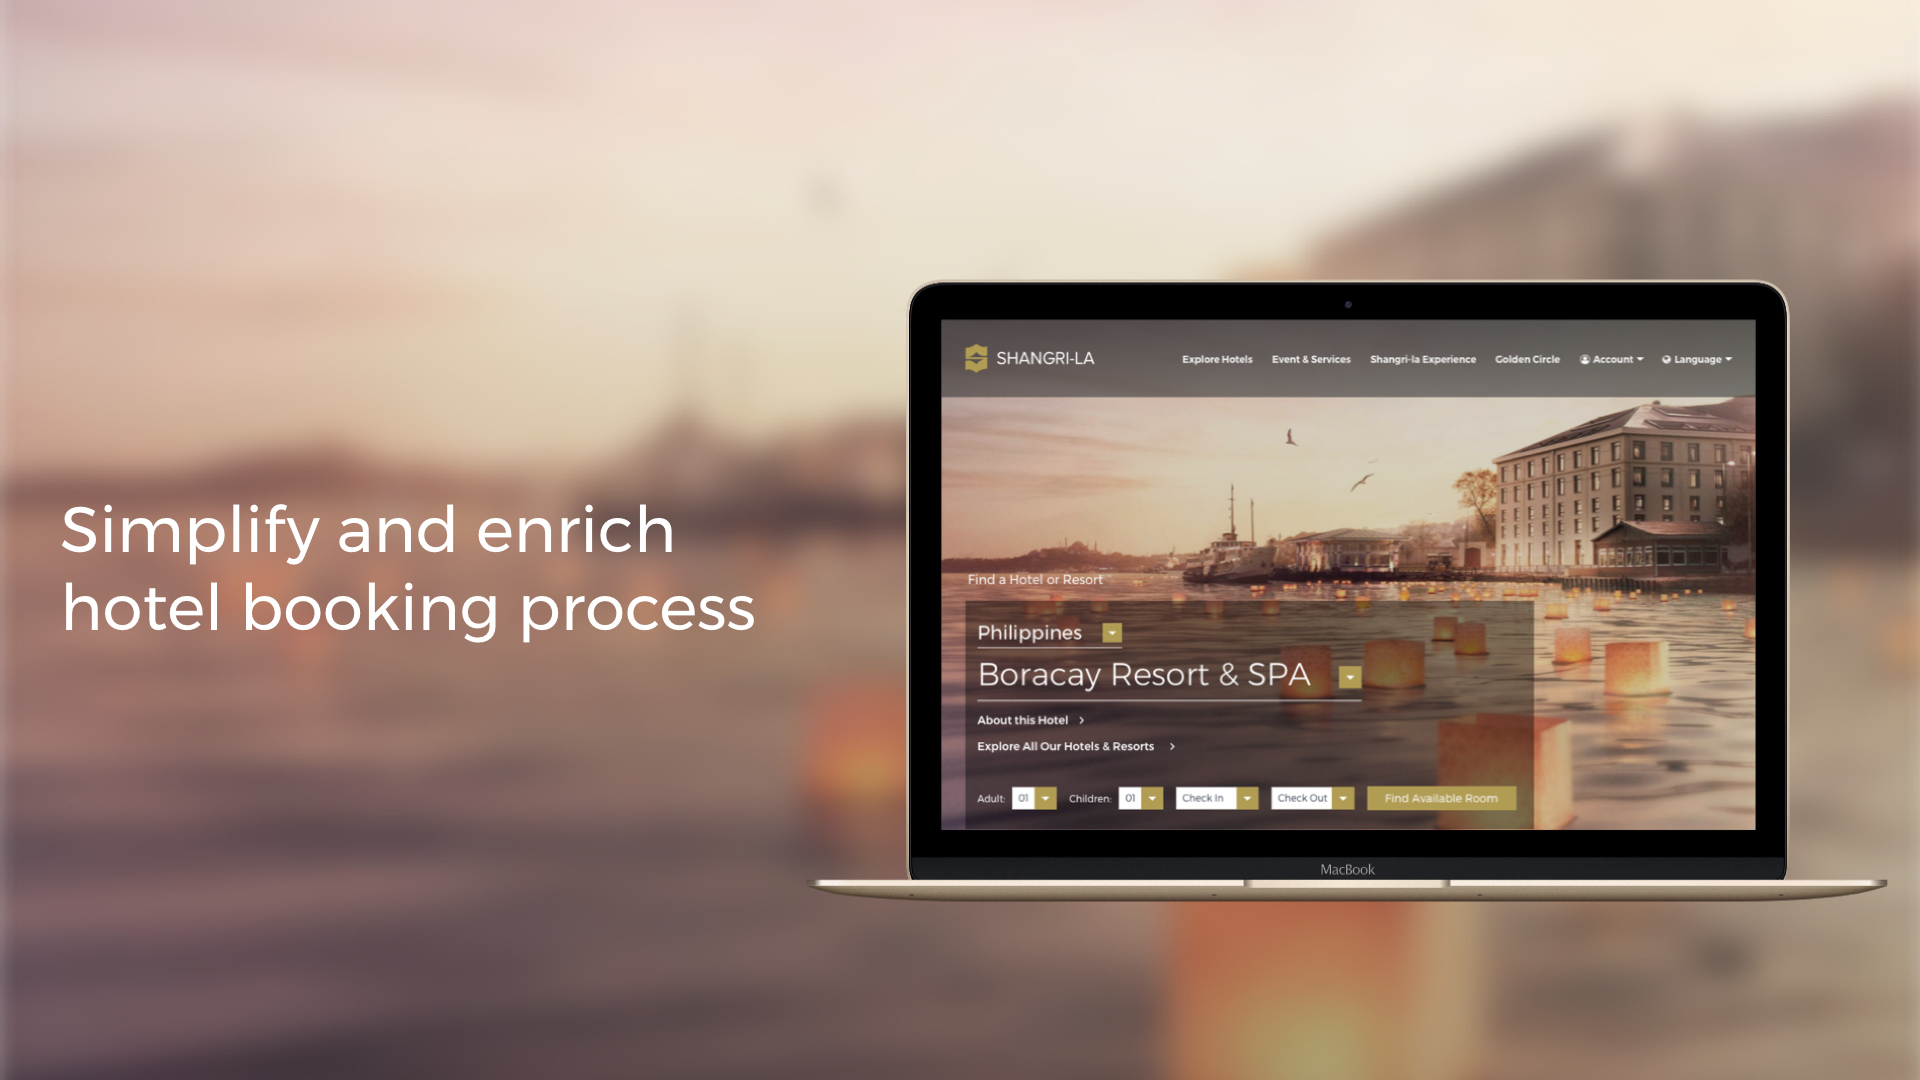 Easier Booking Workflow and Showcase Hotel Destination by Self-discovery: